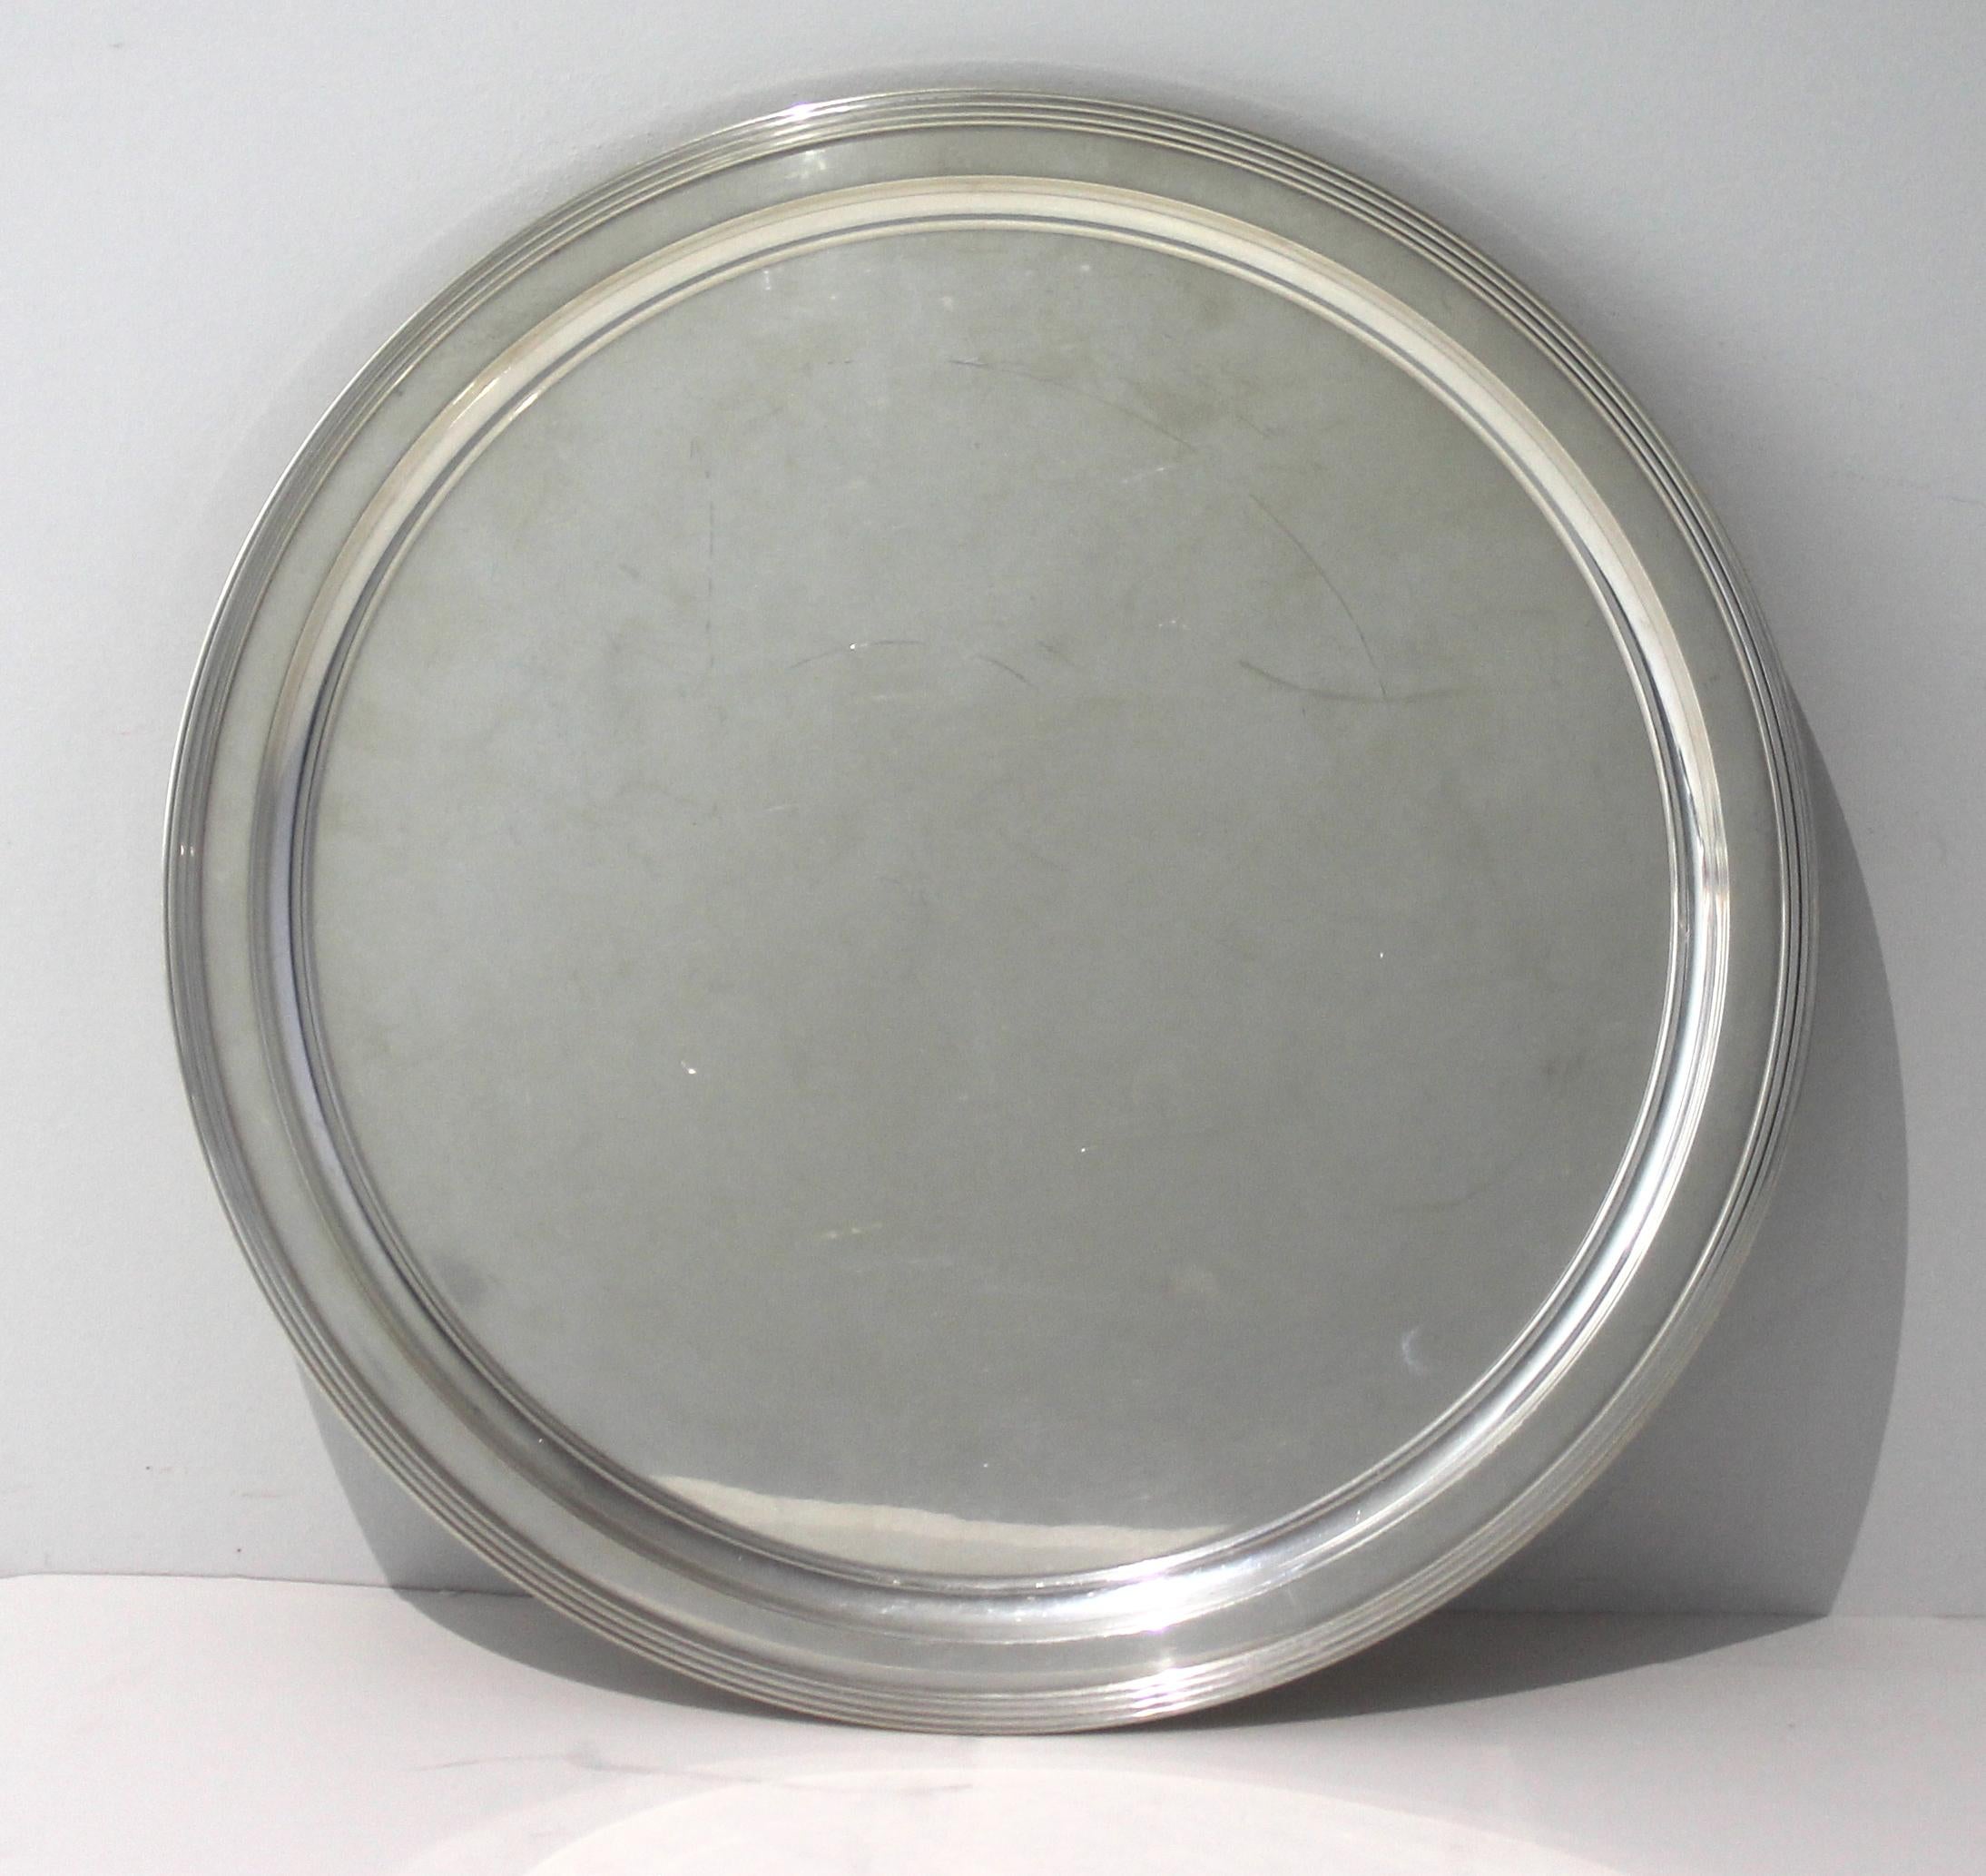 Tiffany & Co. Round Sterling Silver Tray 2